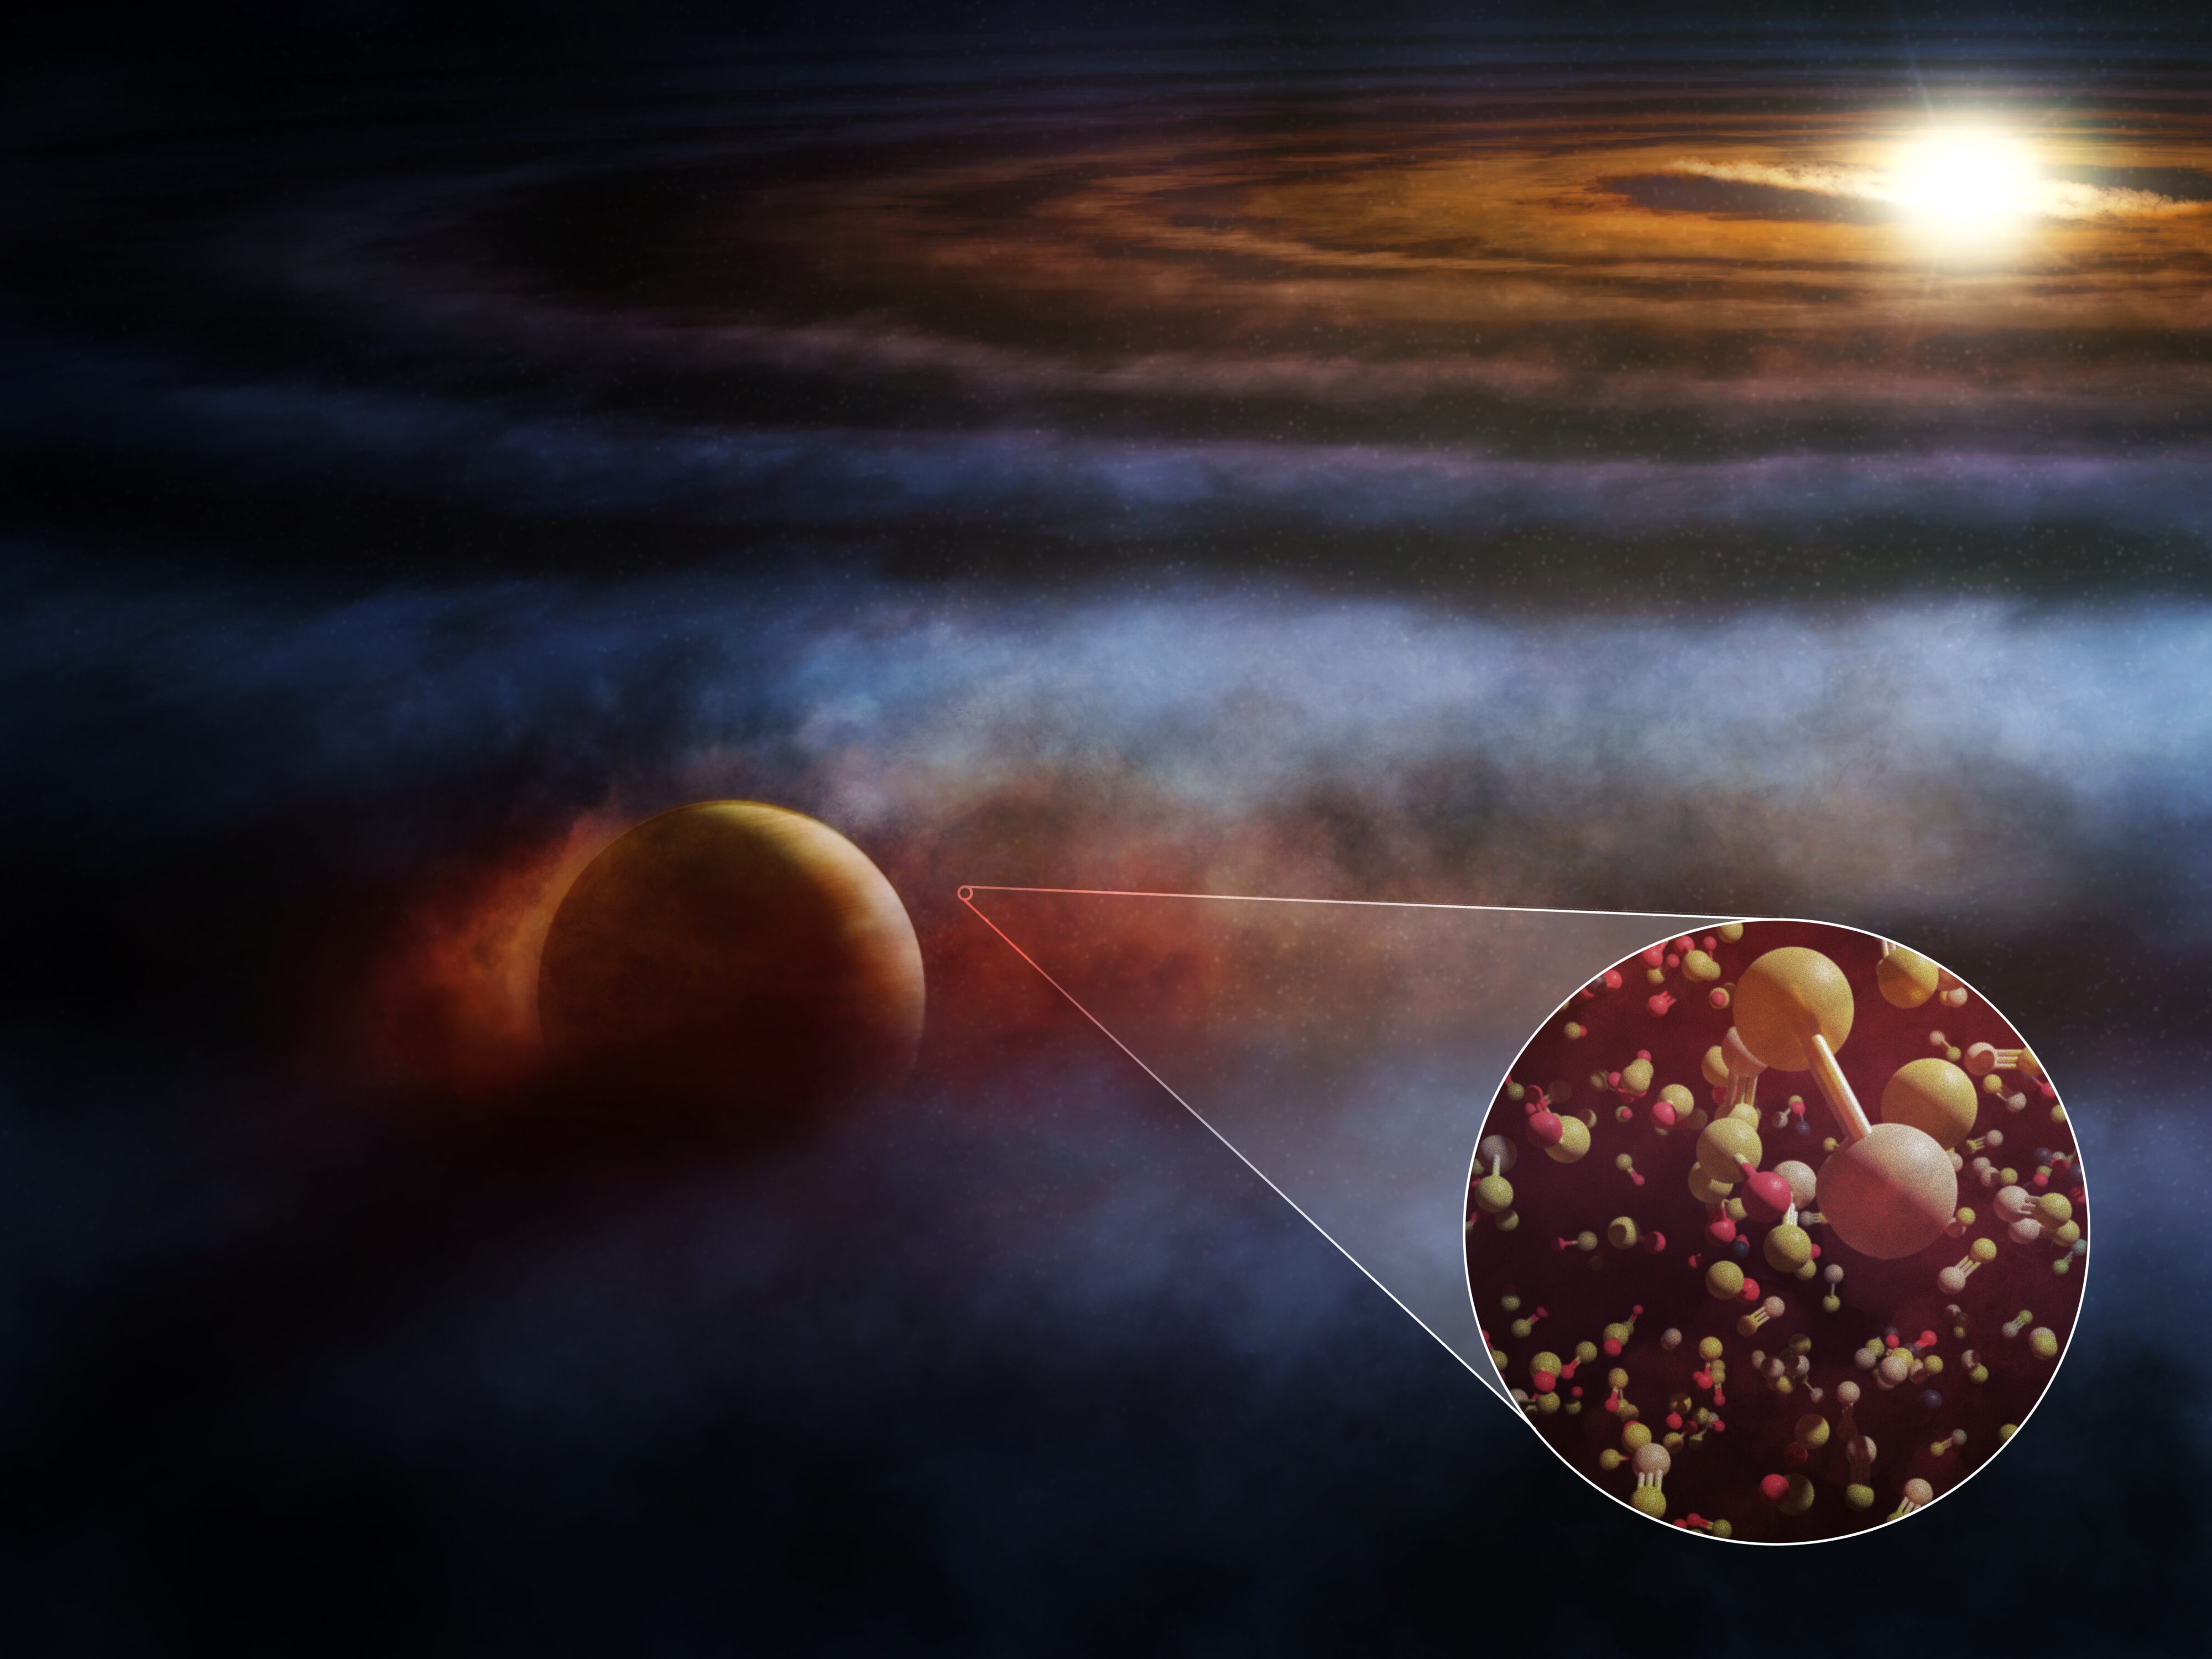 Located in the constellation Sagittarius, the young star HD 169142 harbors a giant protoplanet embedded within its dusty, gas-rich protoplanetary disk.  This artist's conception shows the Jupiter-like planet interacting with and heating nearby molecular gas, driving the outflows seen in various emission lines, including those from shock-tracking molecules like SO and SiS, and 12CO and 13CO commonly seen.  Credit: ALMA (ESO/NAOJ/NRAO), M. Weiss (NRAO/AUI/NSF)